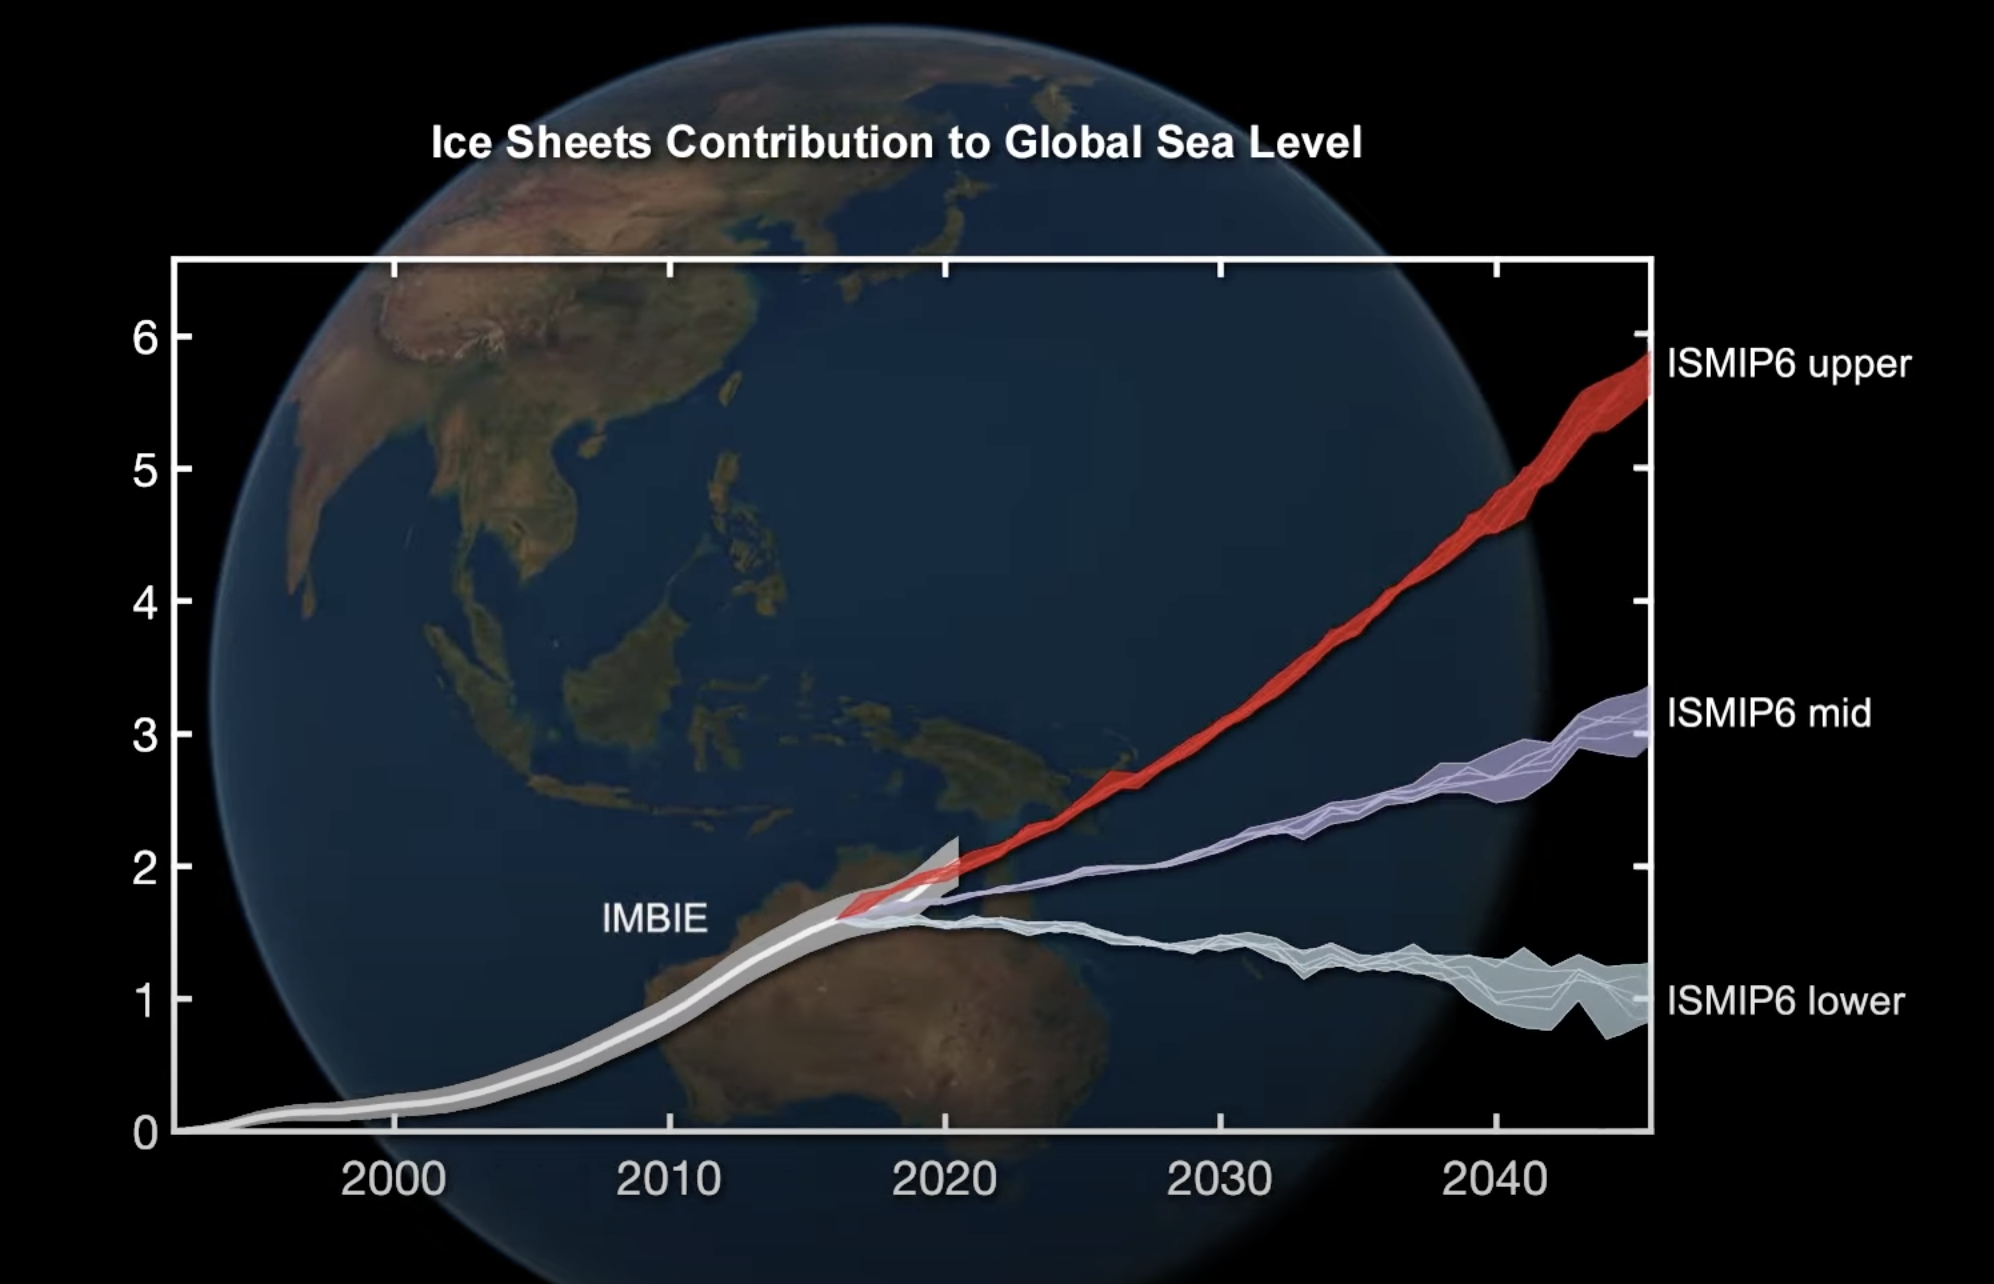 Ice sheet contribution to global average sea level - past, present and future